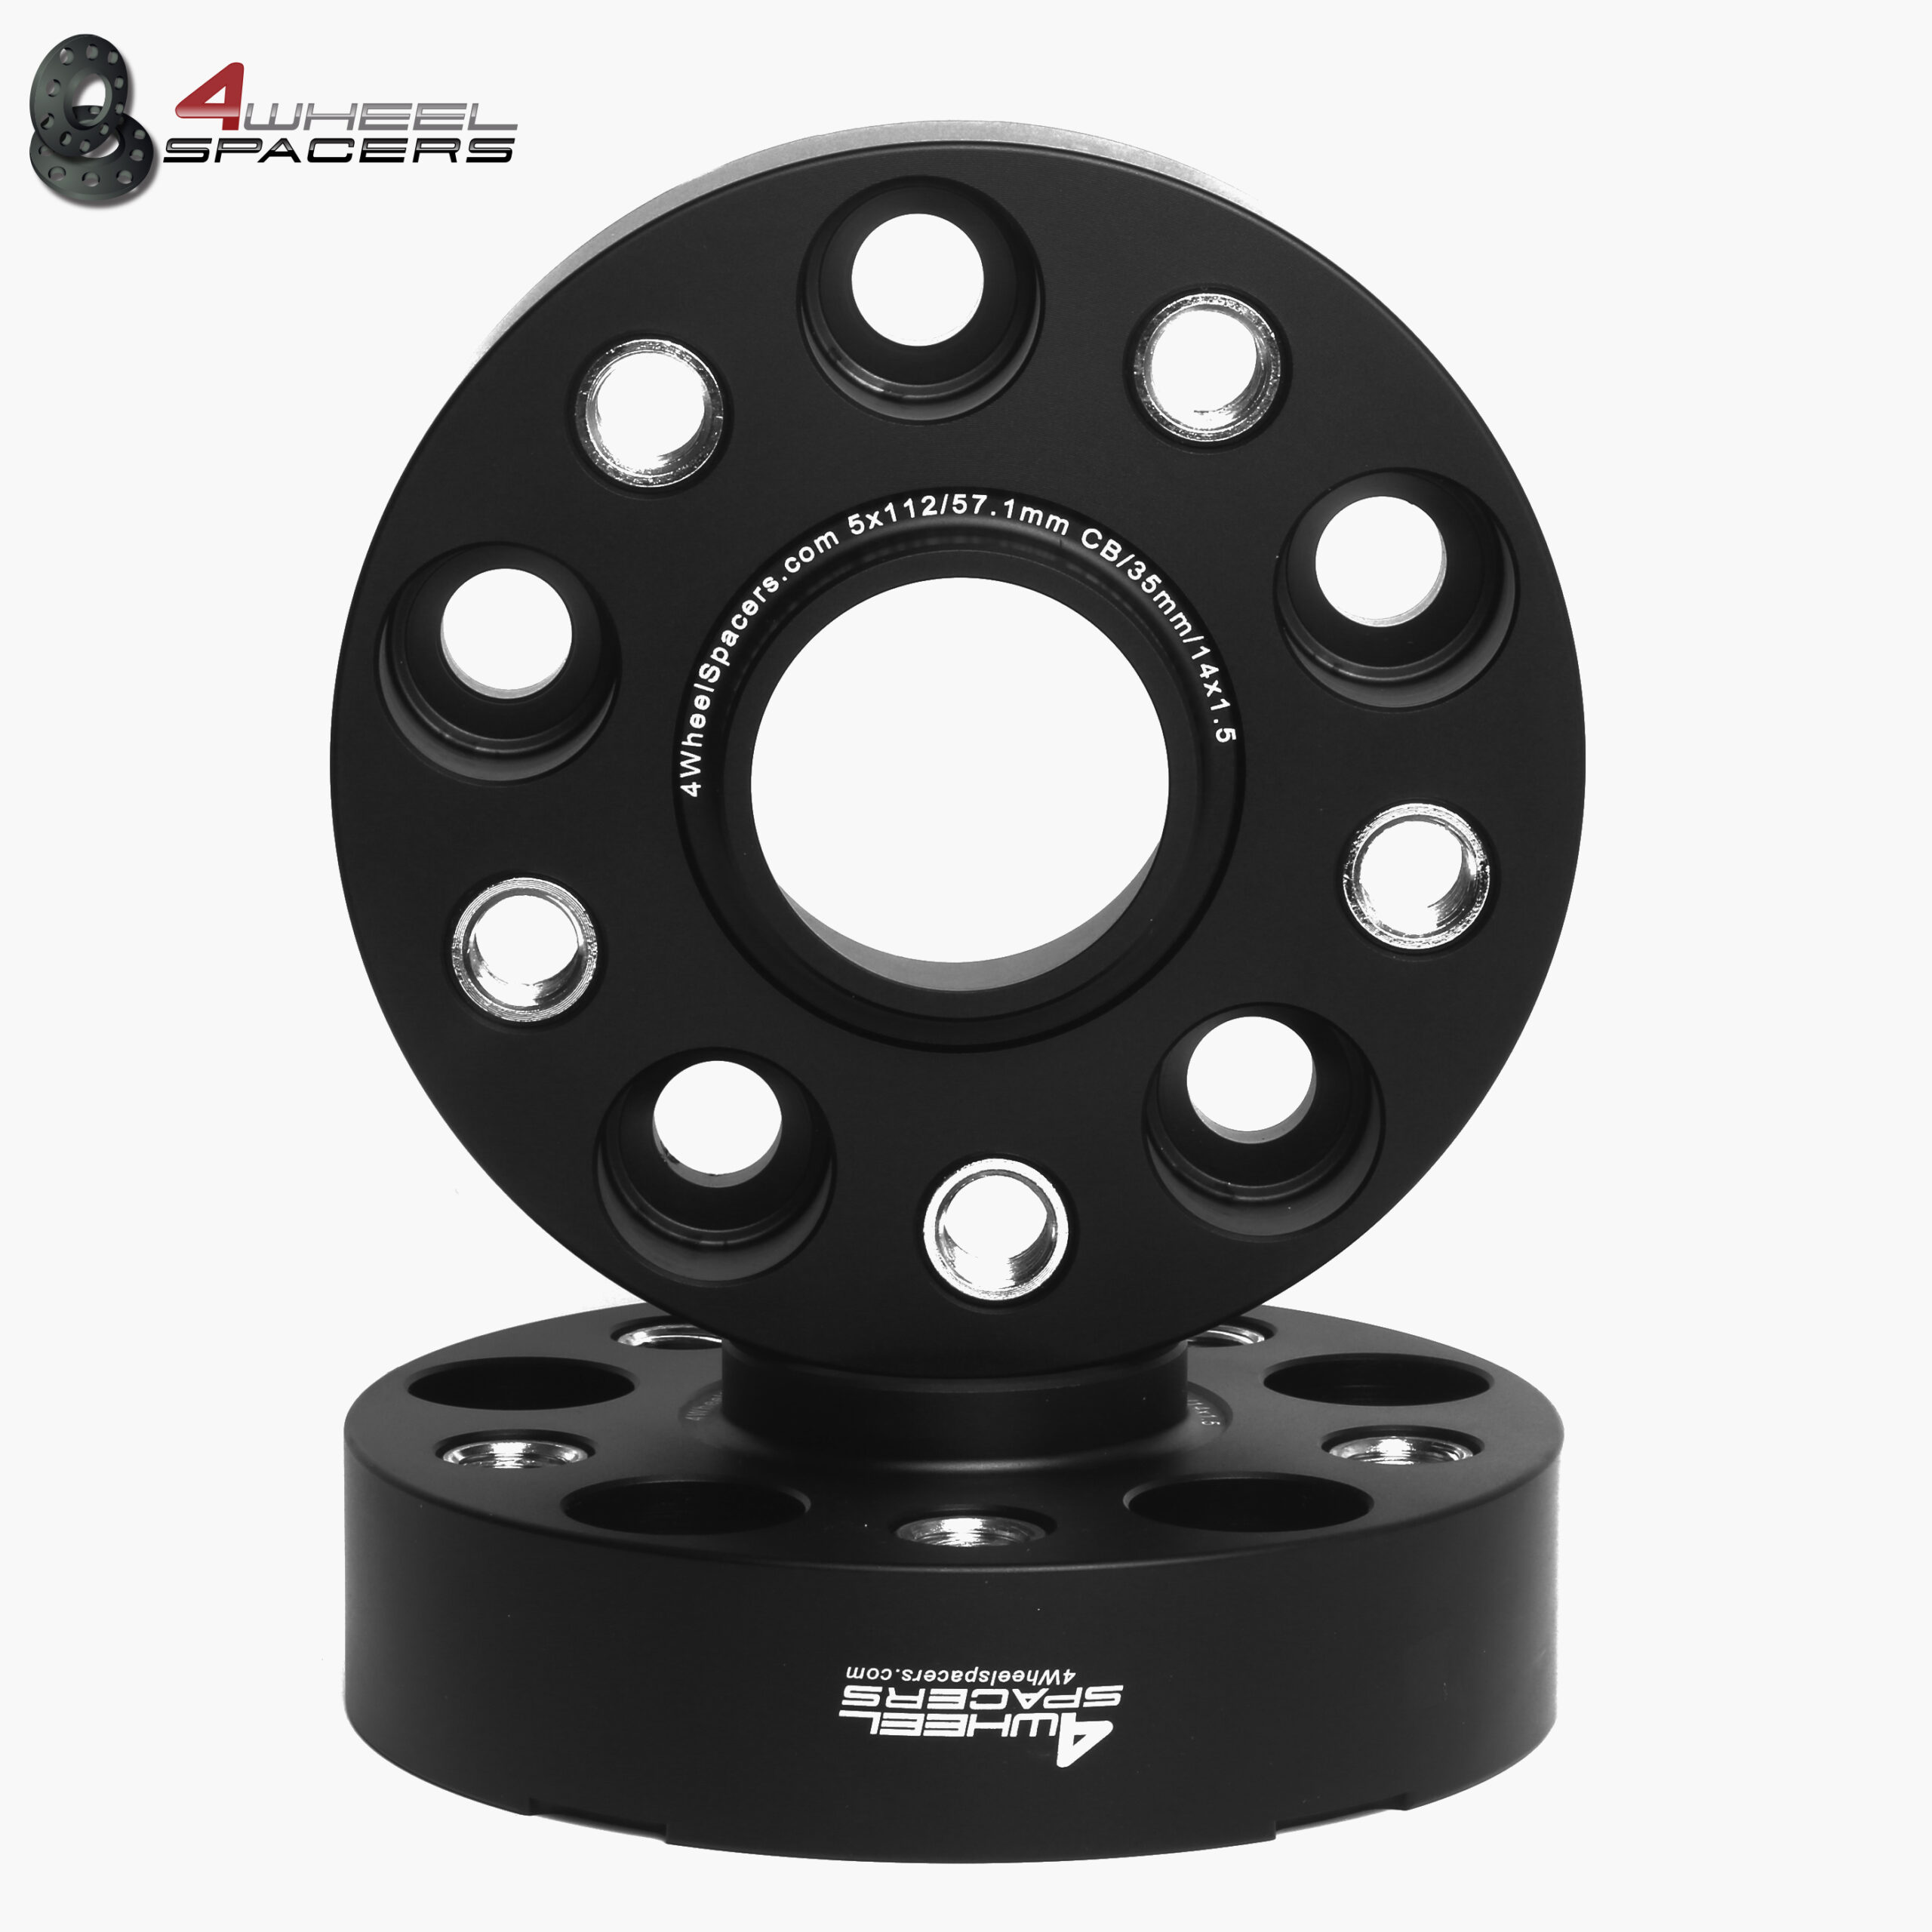 14"x4" Round Black Washable Air Cleaner Drop SBC 350 BBC 454 Chevy StreetHot Rod